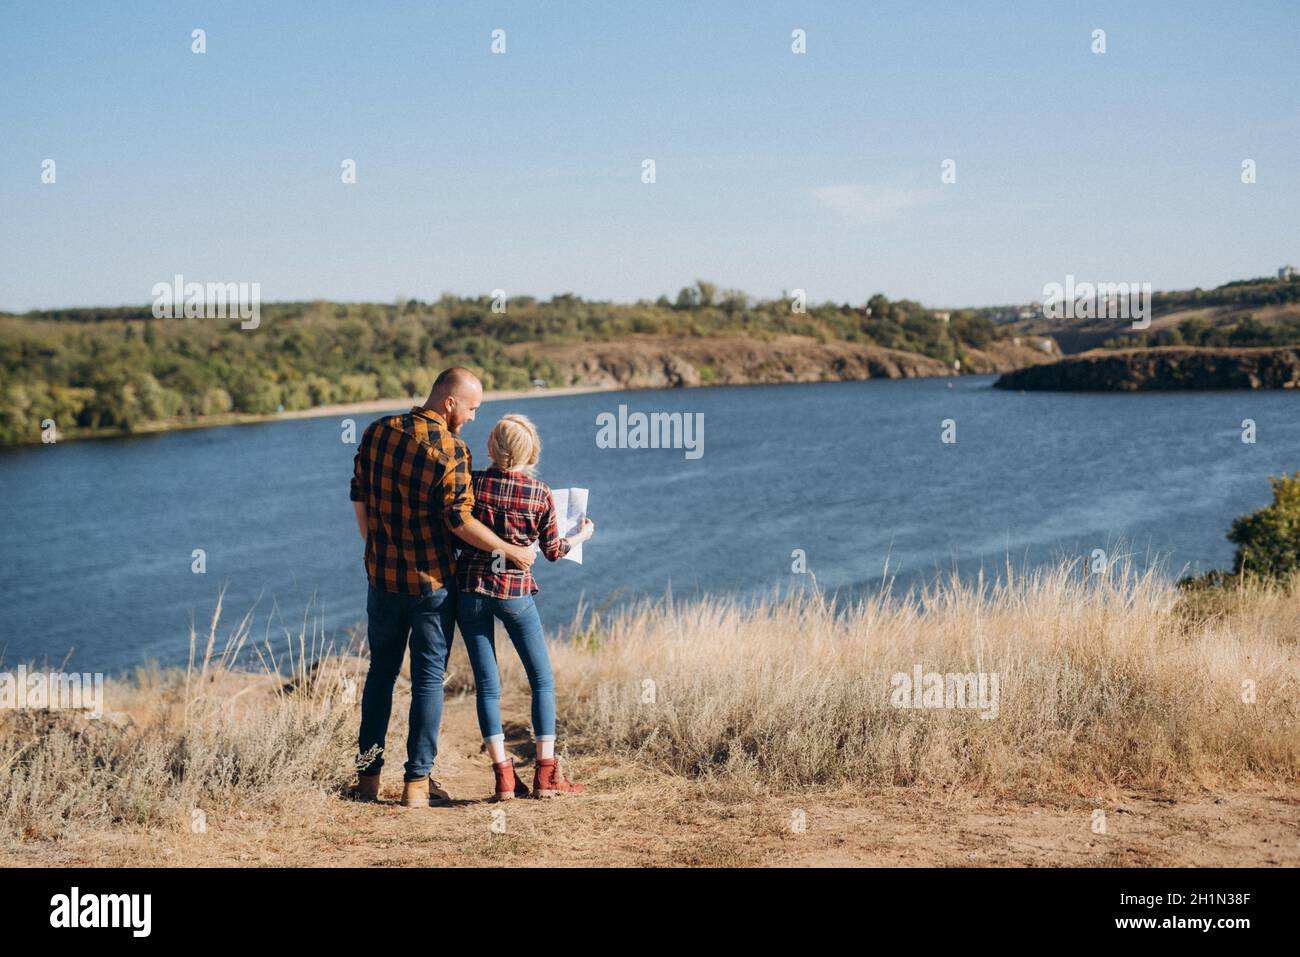 Bald guy with a beard and a blonde girl are looking at the map and looking for a route to travel Stock Photo